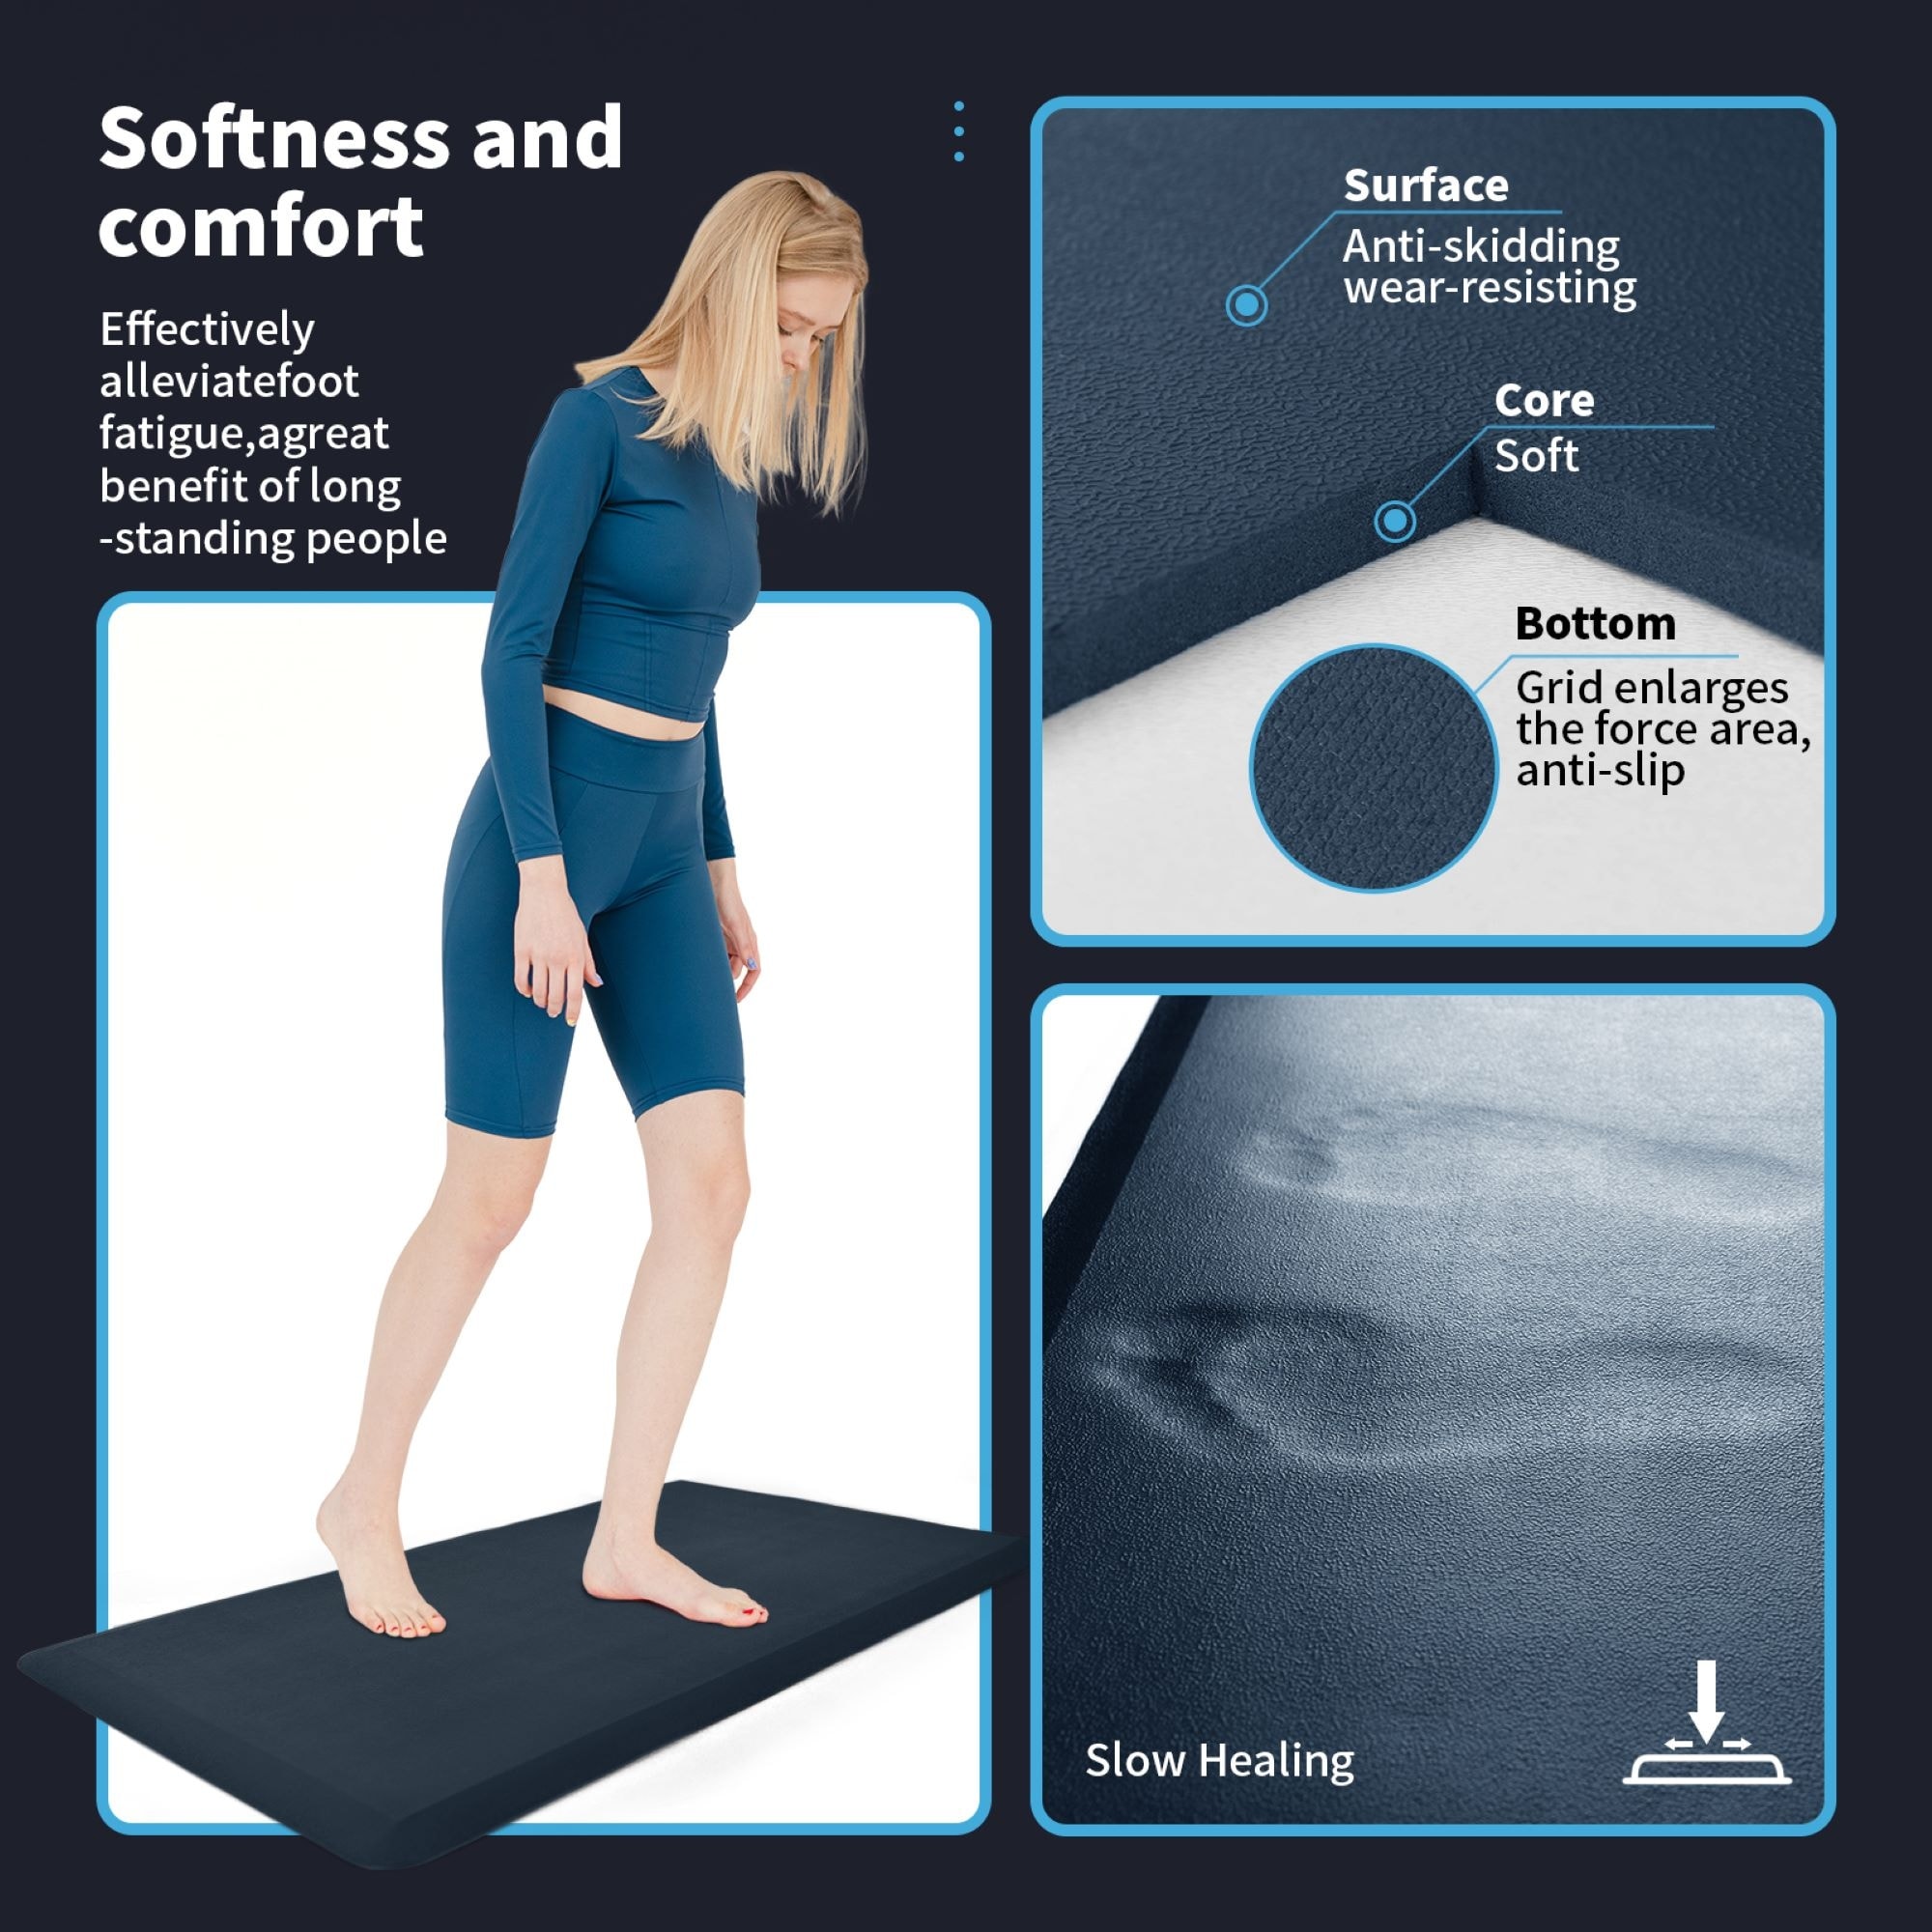  Standee Anti Fatigue Standing Mat, Padded Floor Mats for  Standing- Thick for Support and Comfort, 20 x 30 x 7/8 in. - Designed for  Office, Kitchen, Home or Cashier use- Ergonomic